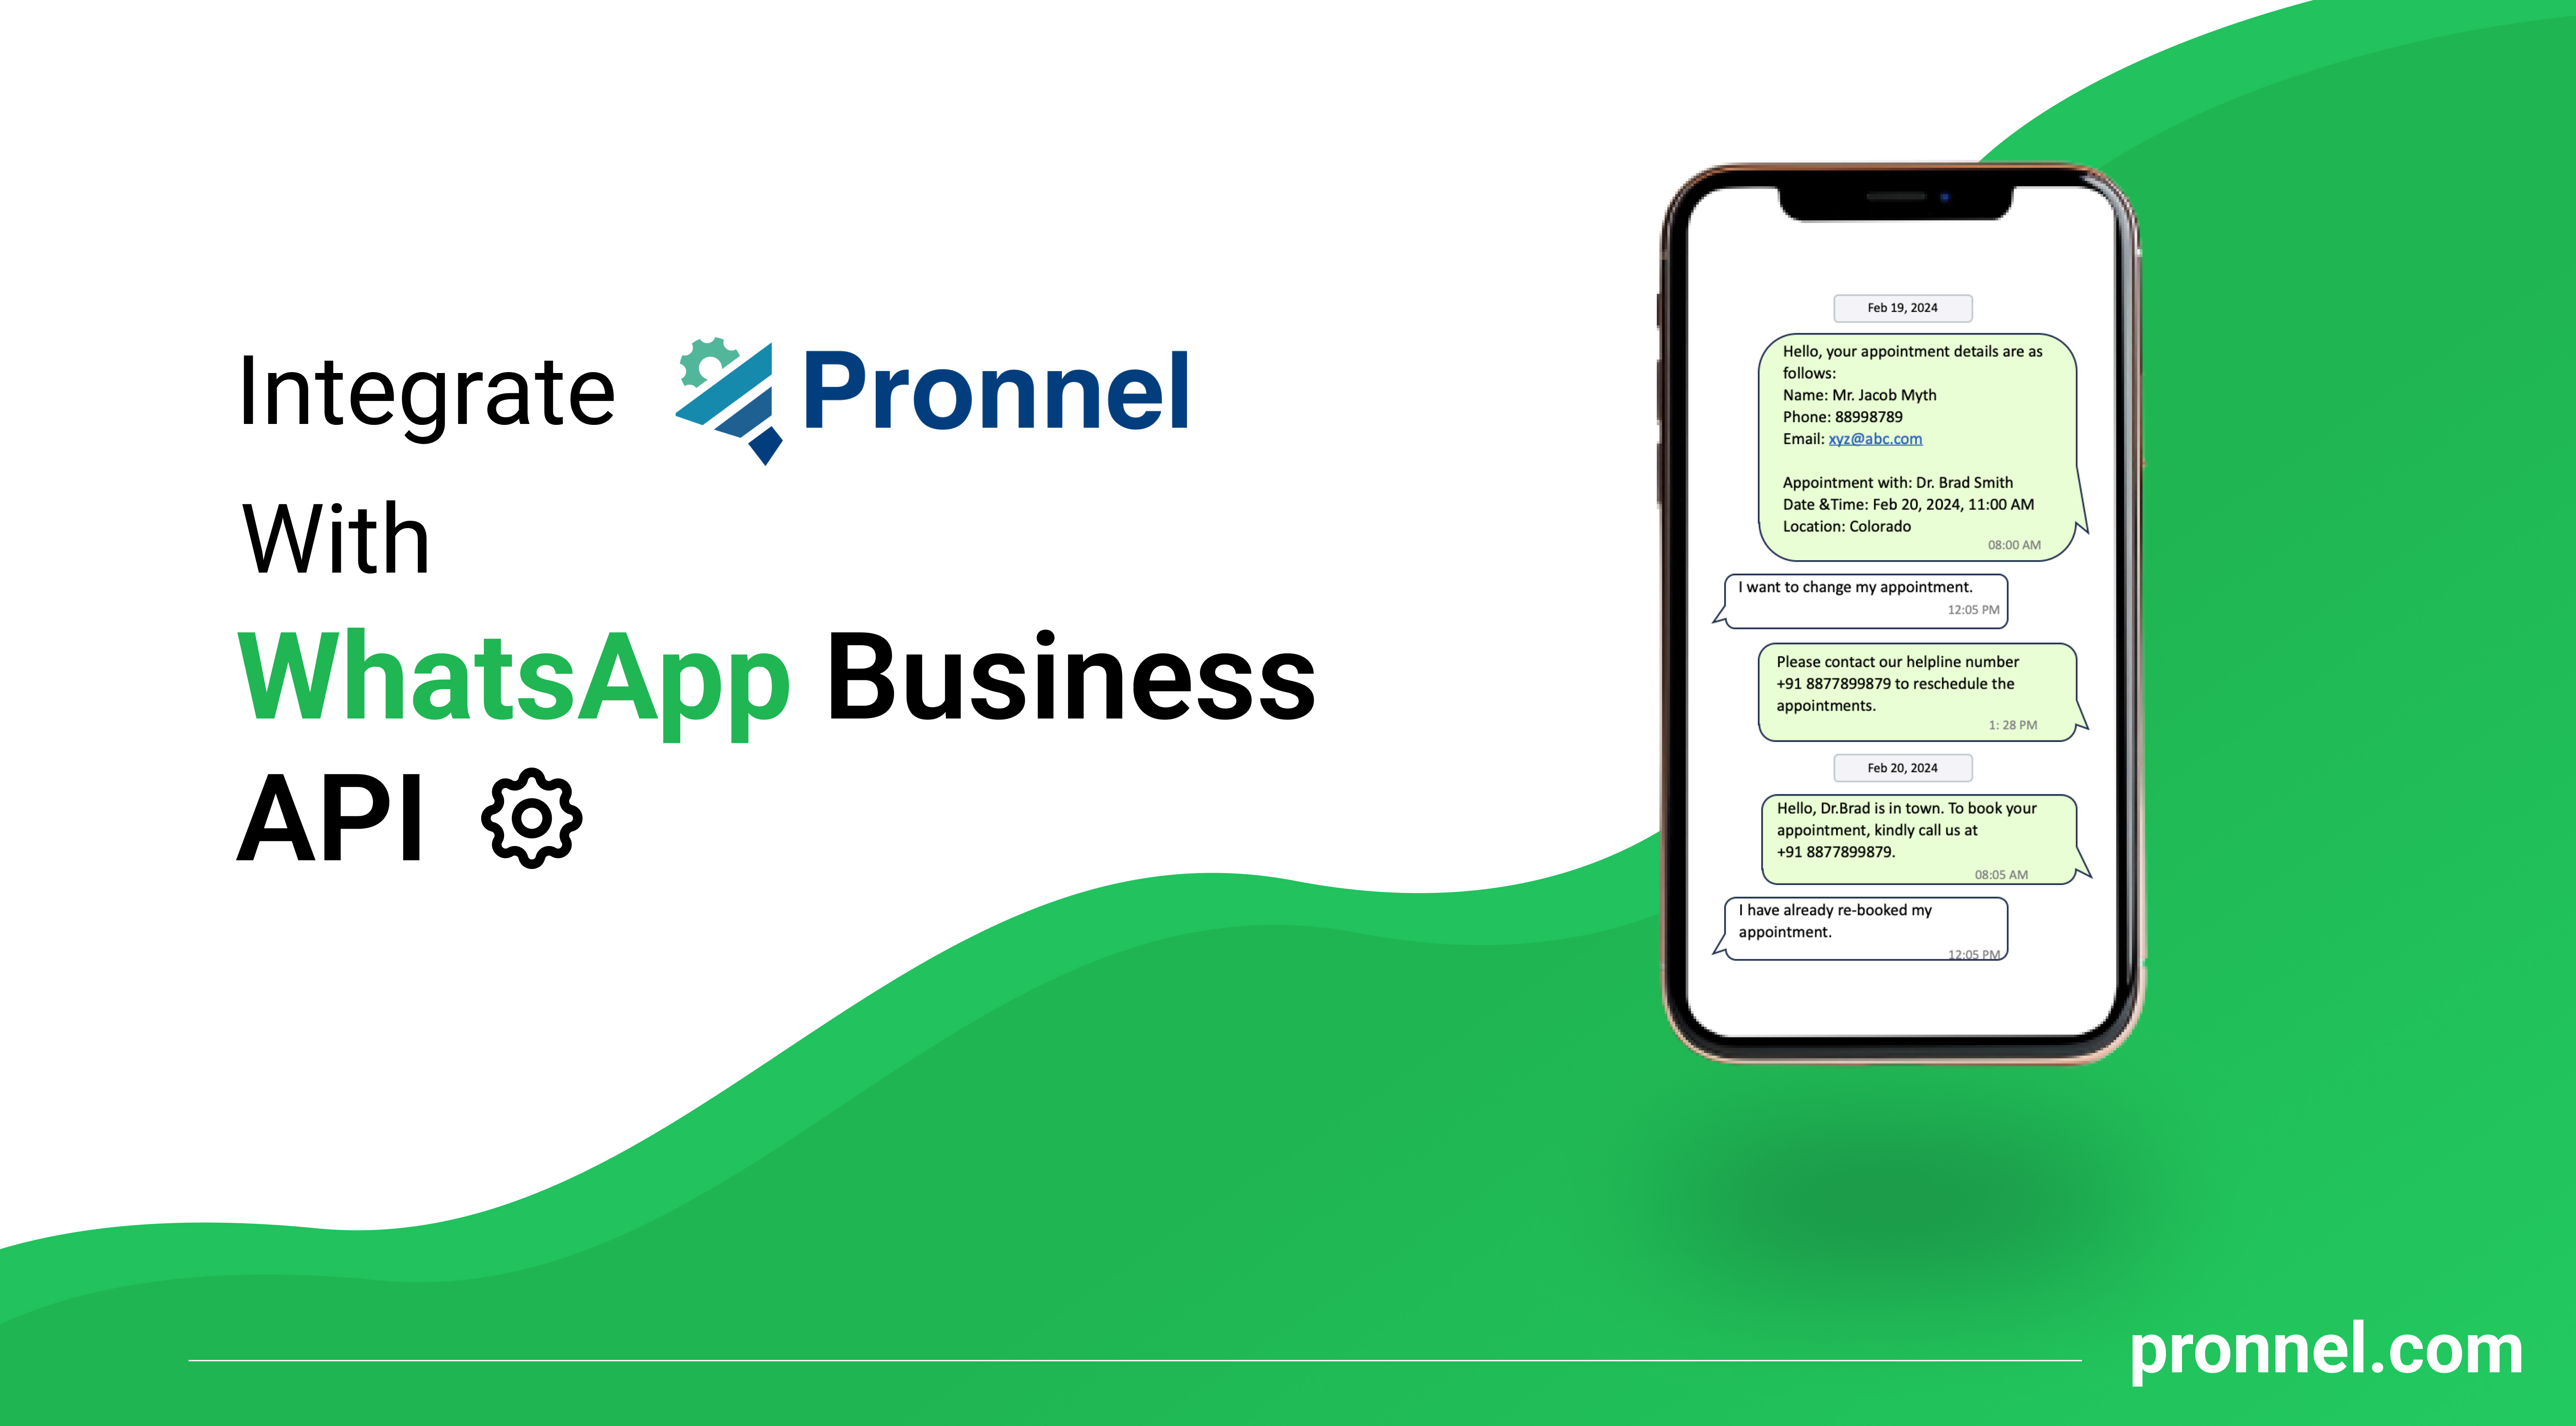 How to integrate Pronnel to do businesses on WhatsApp API.